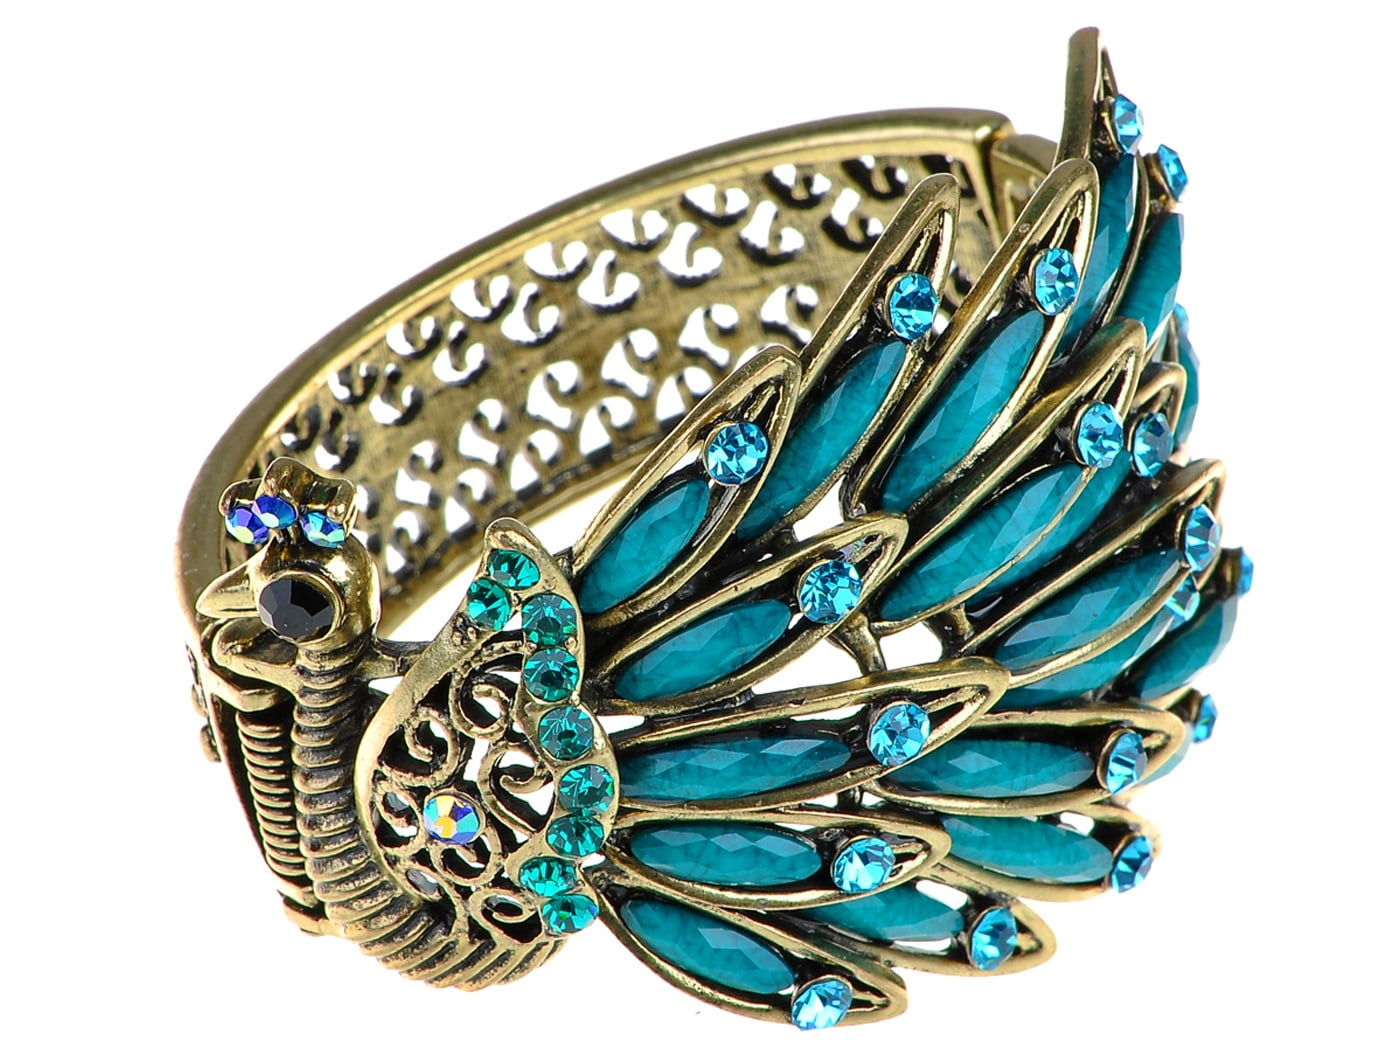 Alilang Womens Antique Golden Tone Peacock Bracelet Bangle with Turquoise Blue Gems